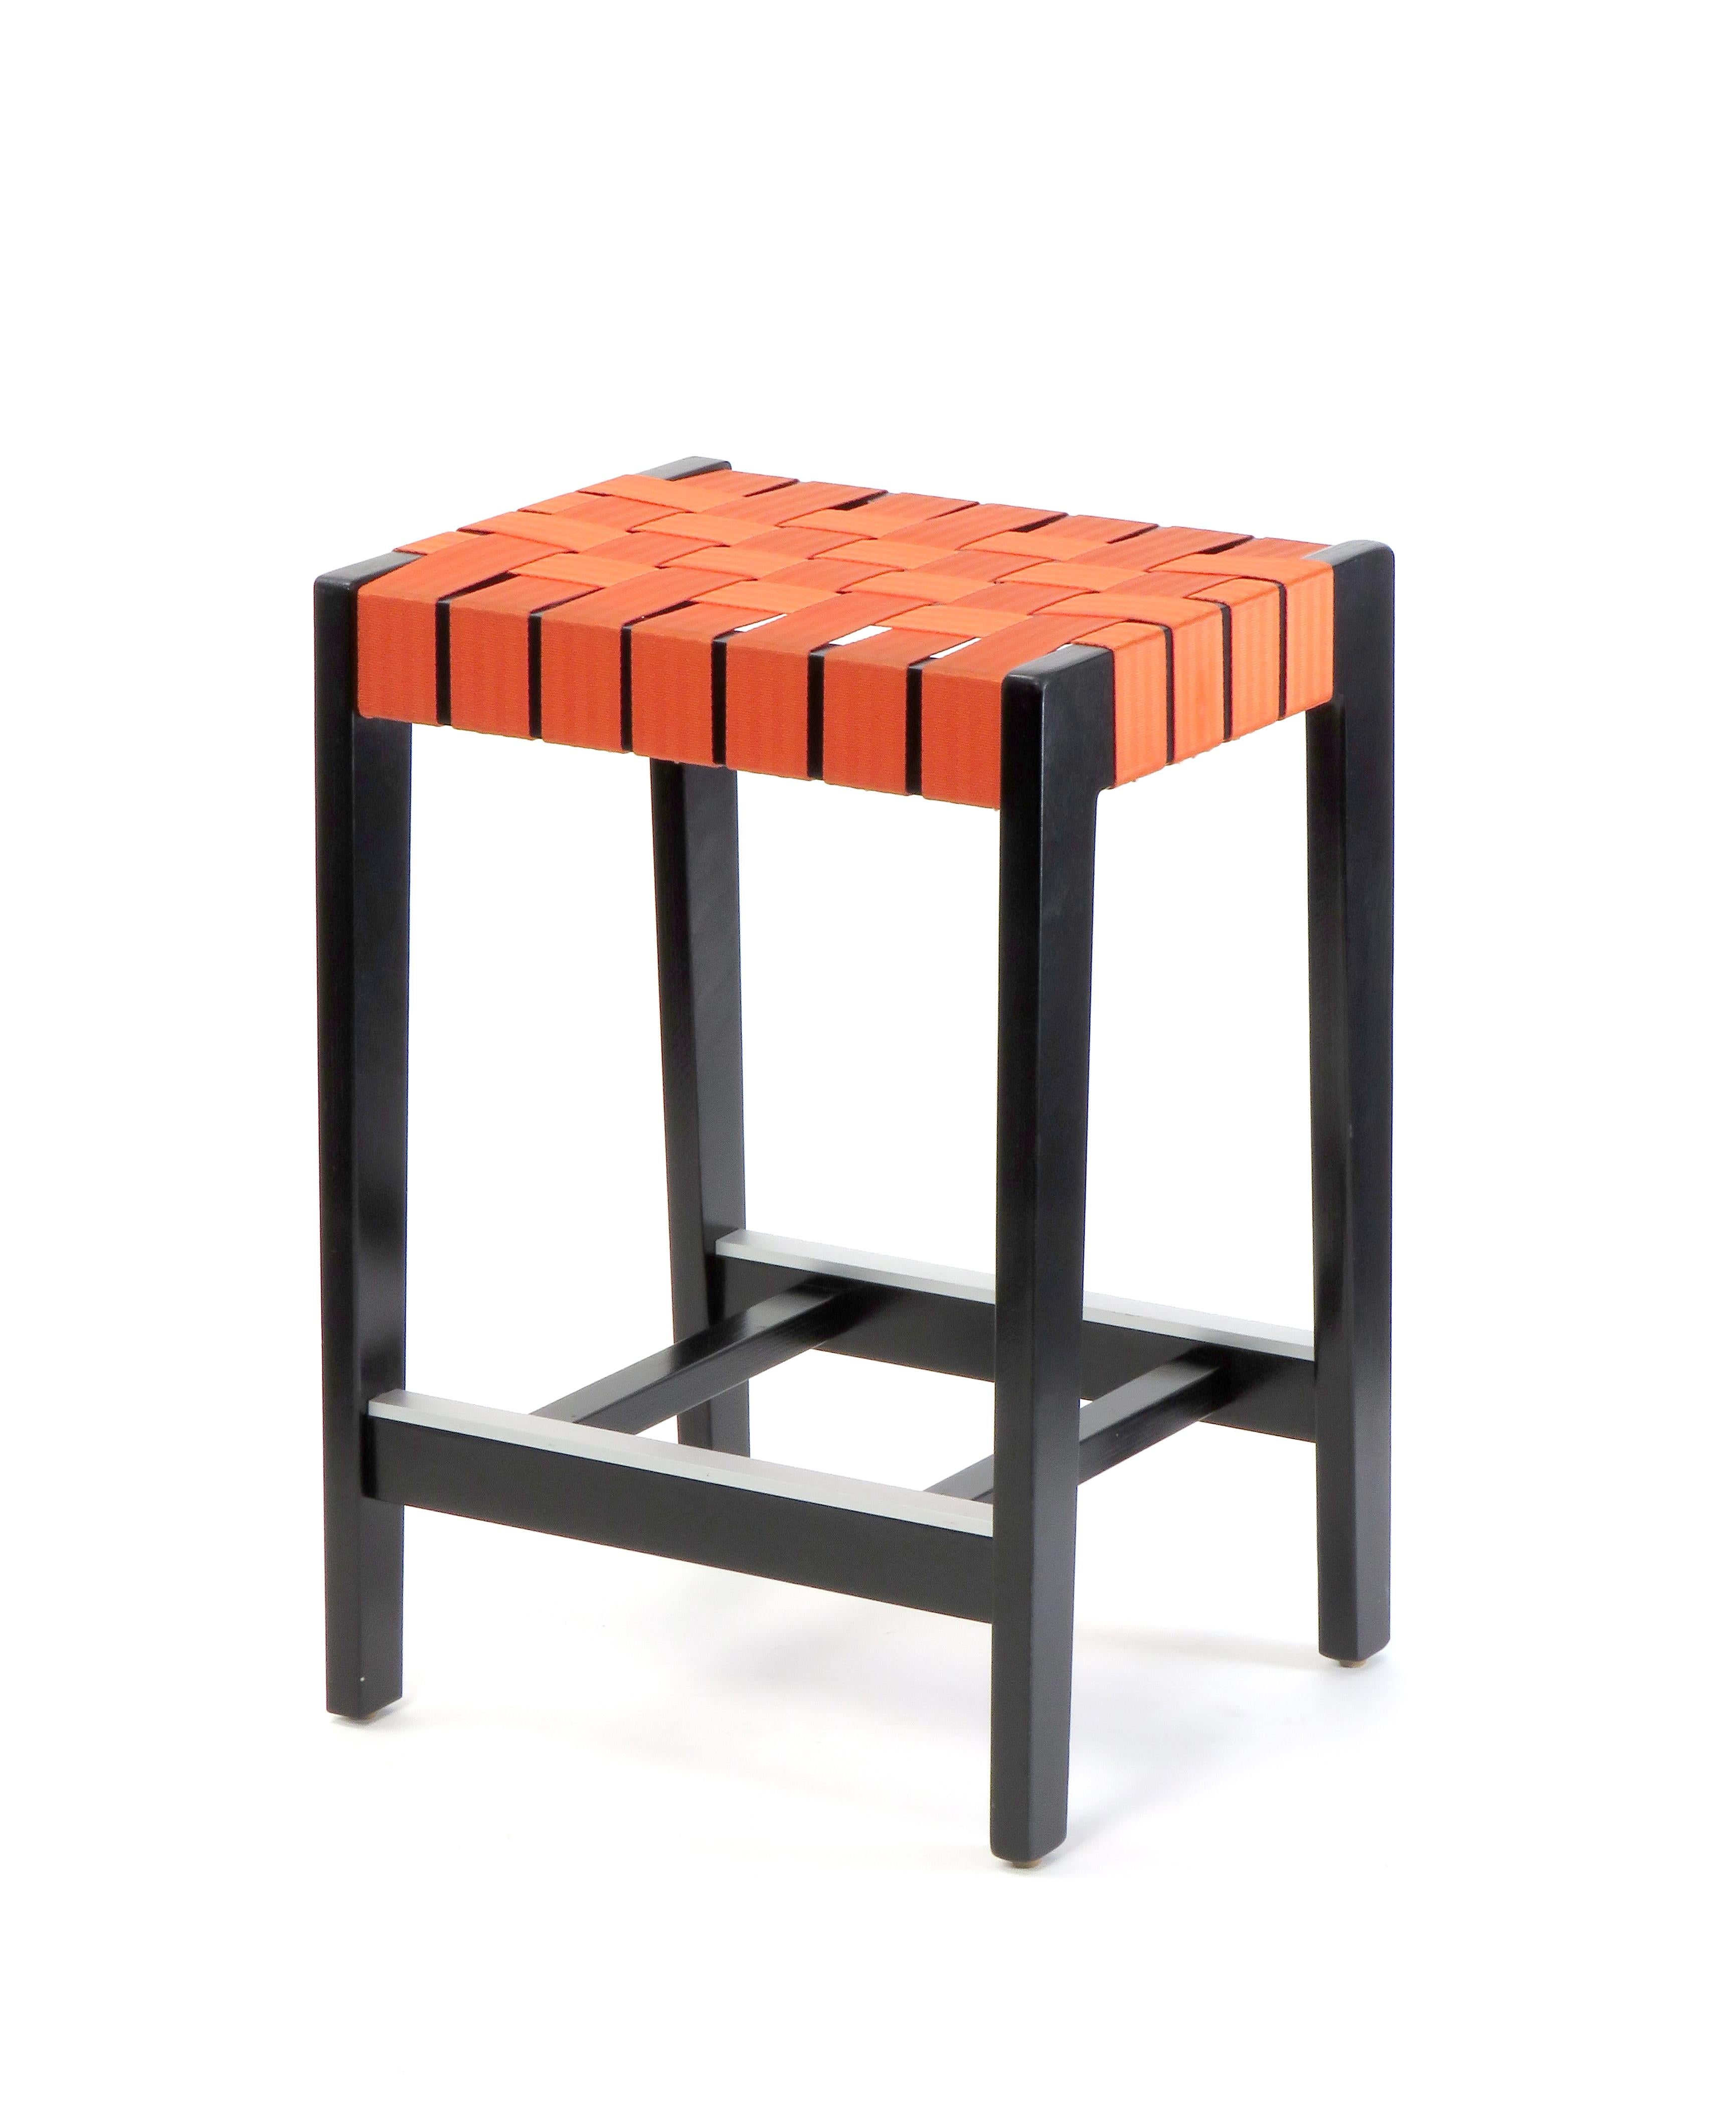 Modern Maple Black Finish Bar Stool with Orange Woven Seat Made in USA by Peter Danko For Sale